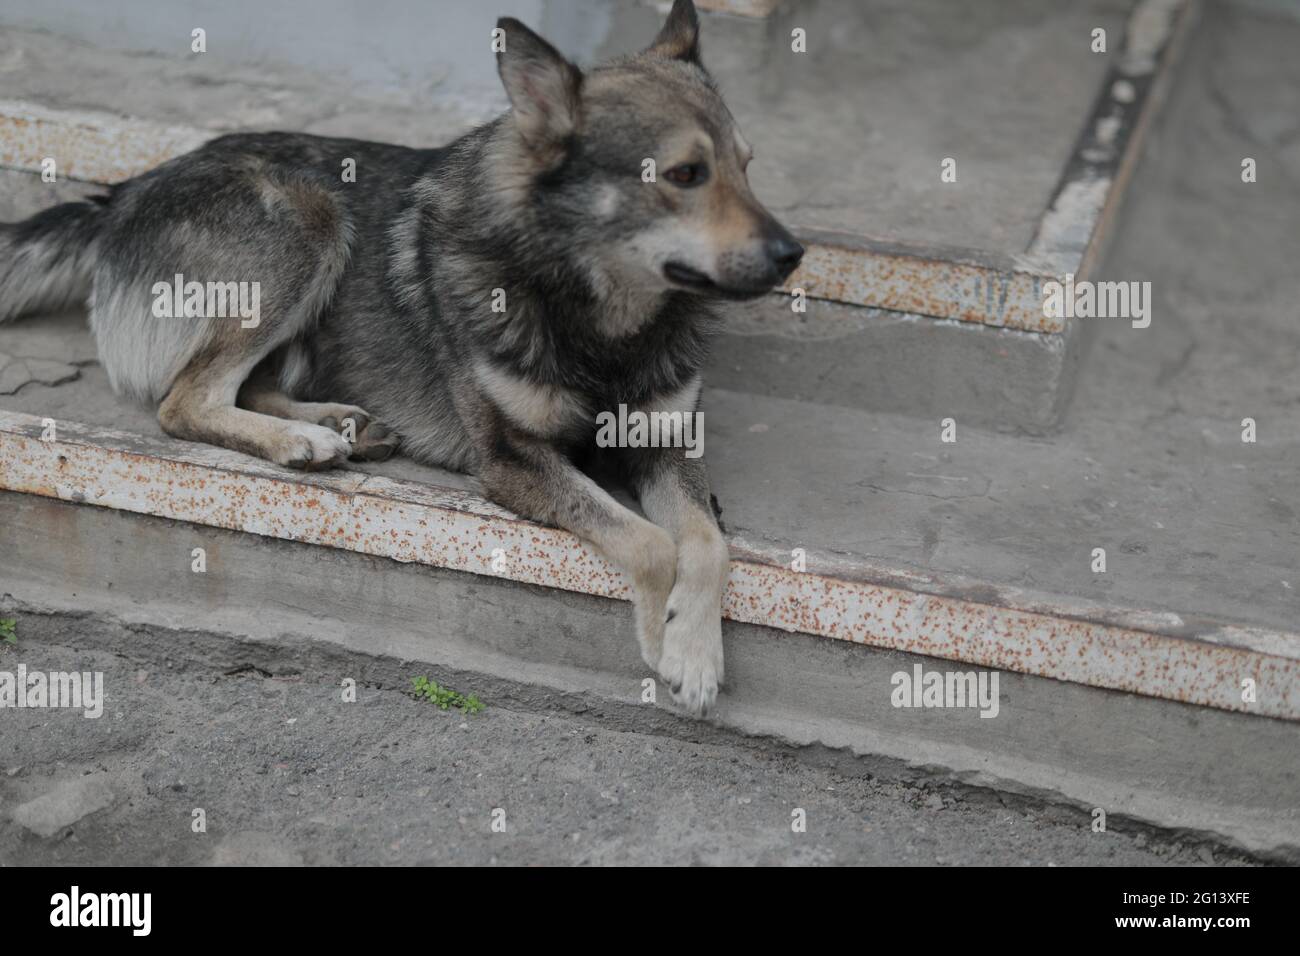 A big dog sitting on a bench Stock Photo